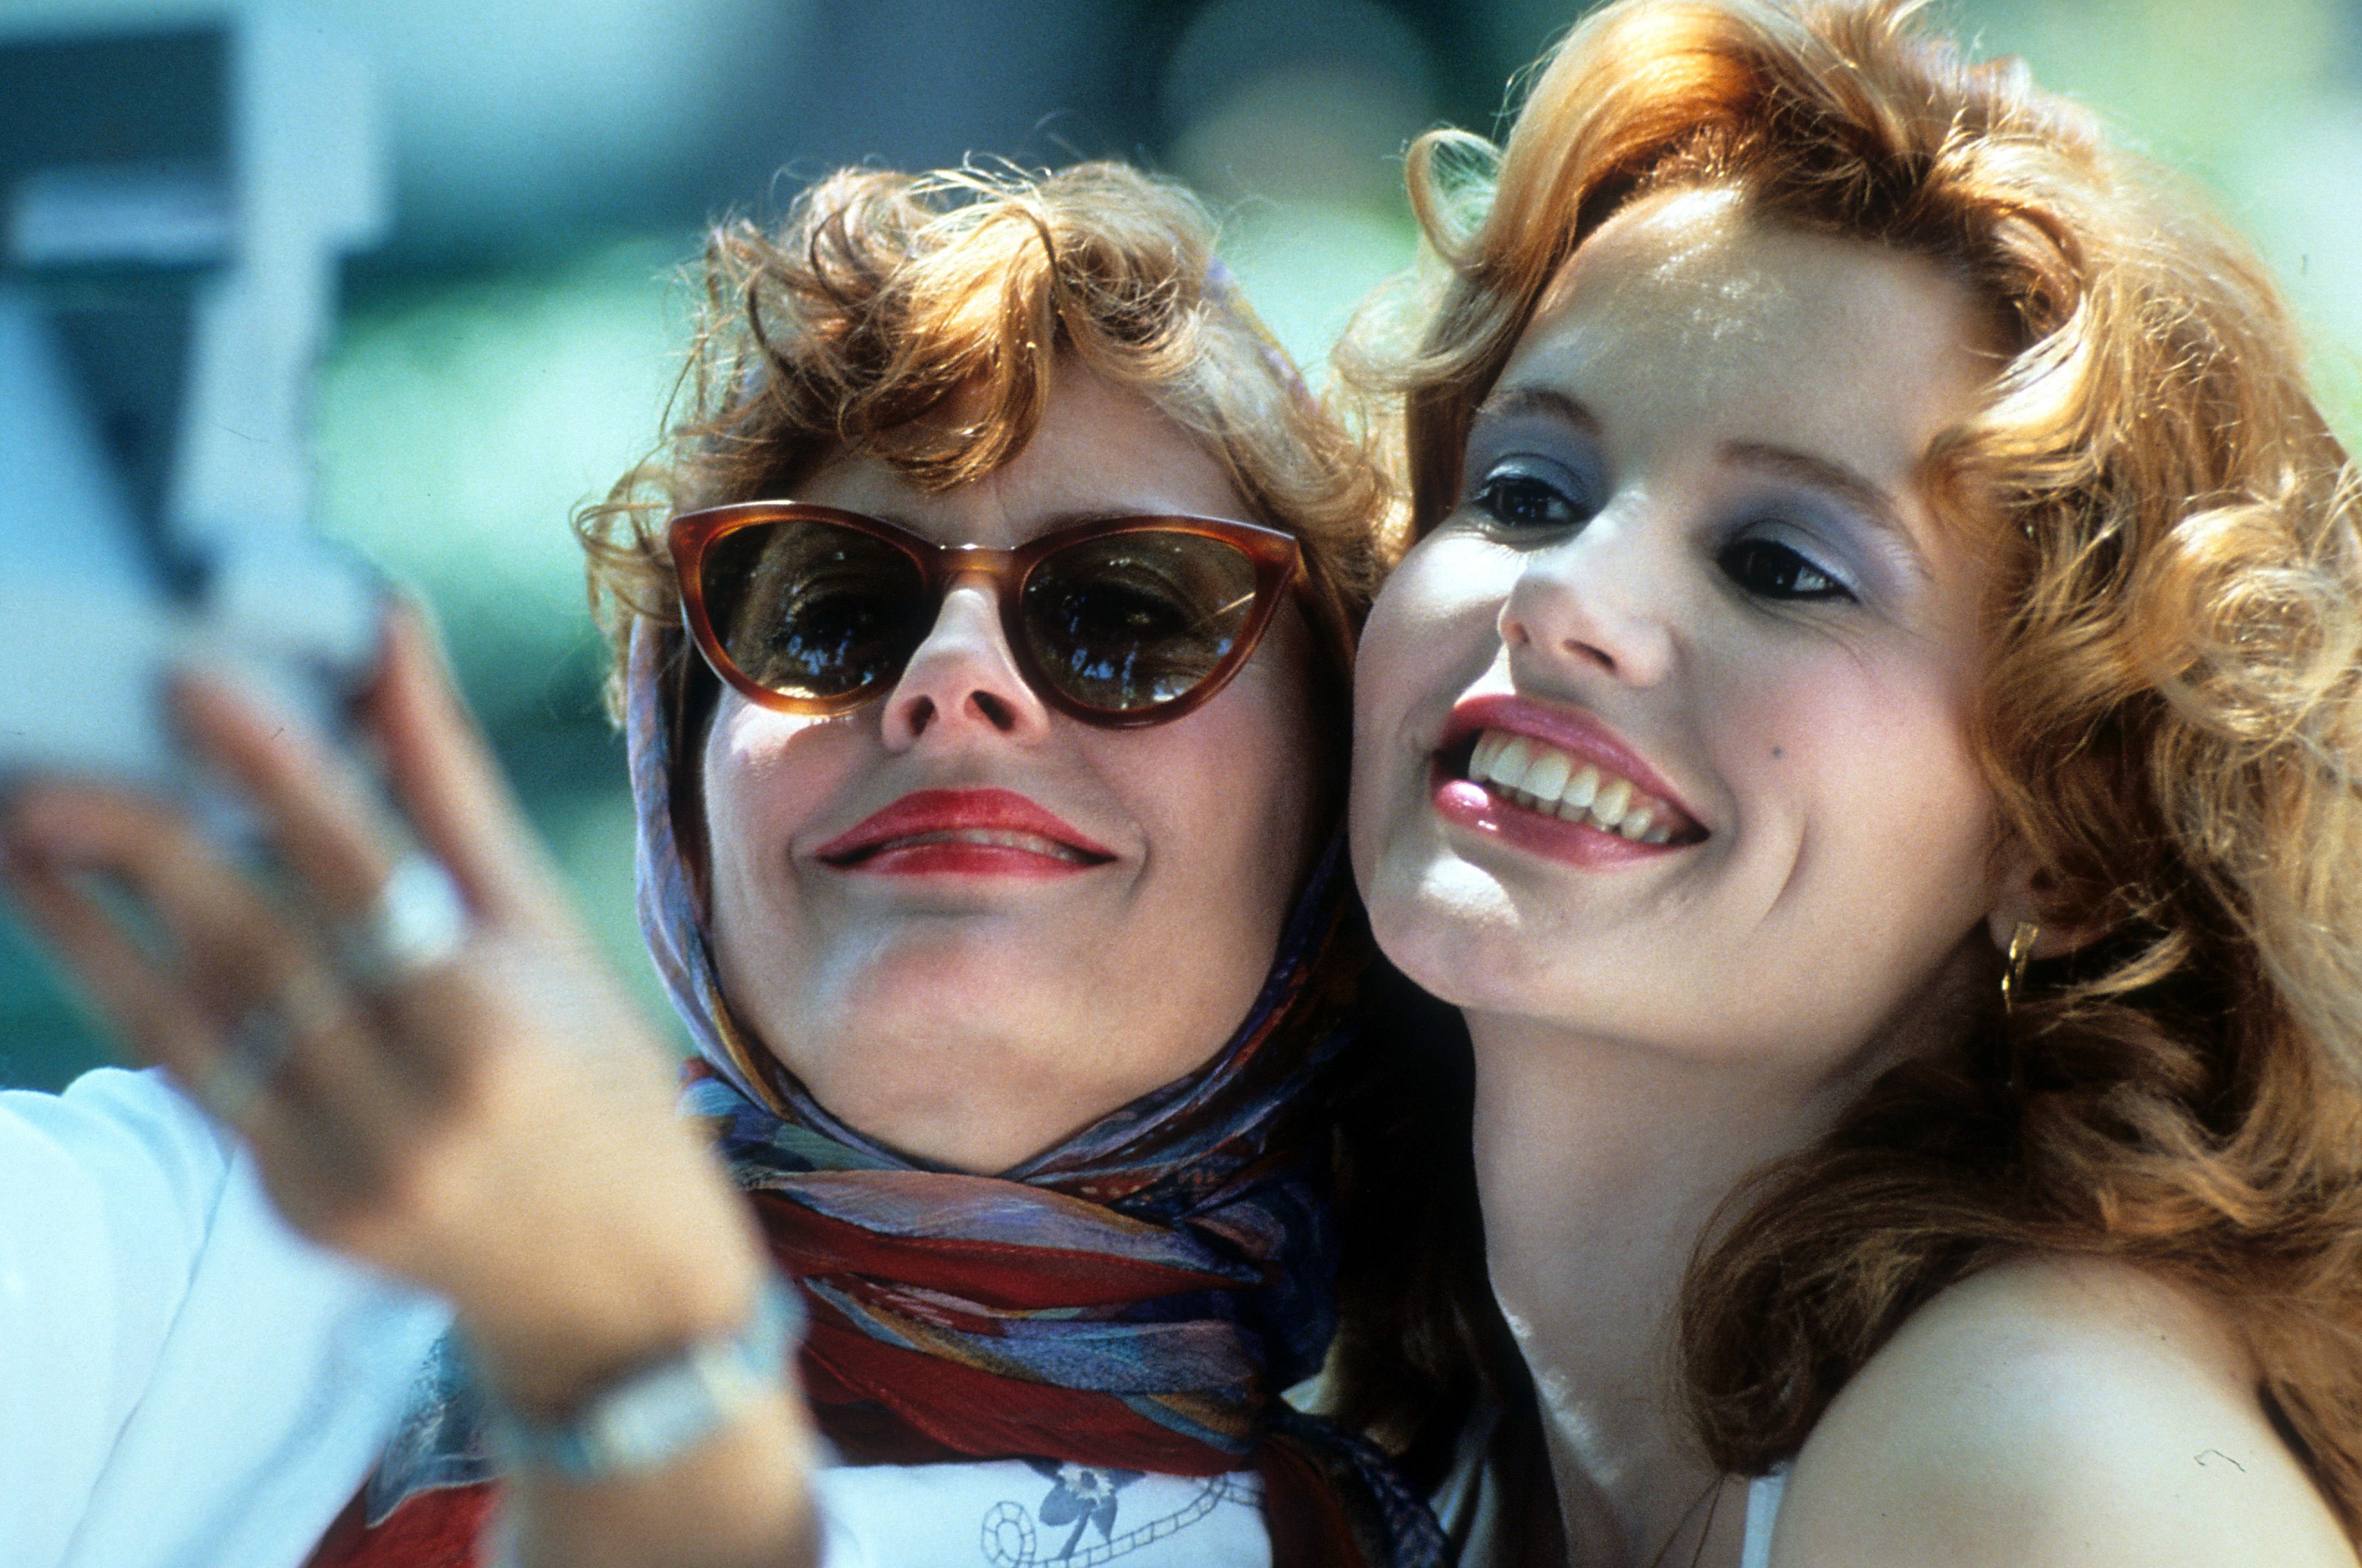 Susan Sarandon and Geena Davis in a scene from the film "Thelma & Louise," 1991 | Source: Getty Images